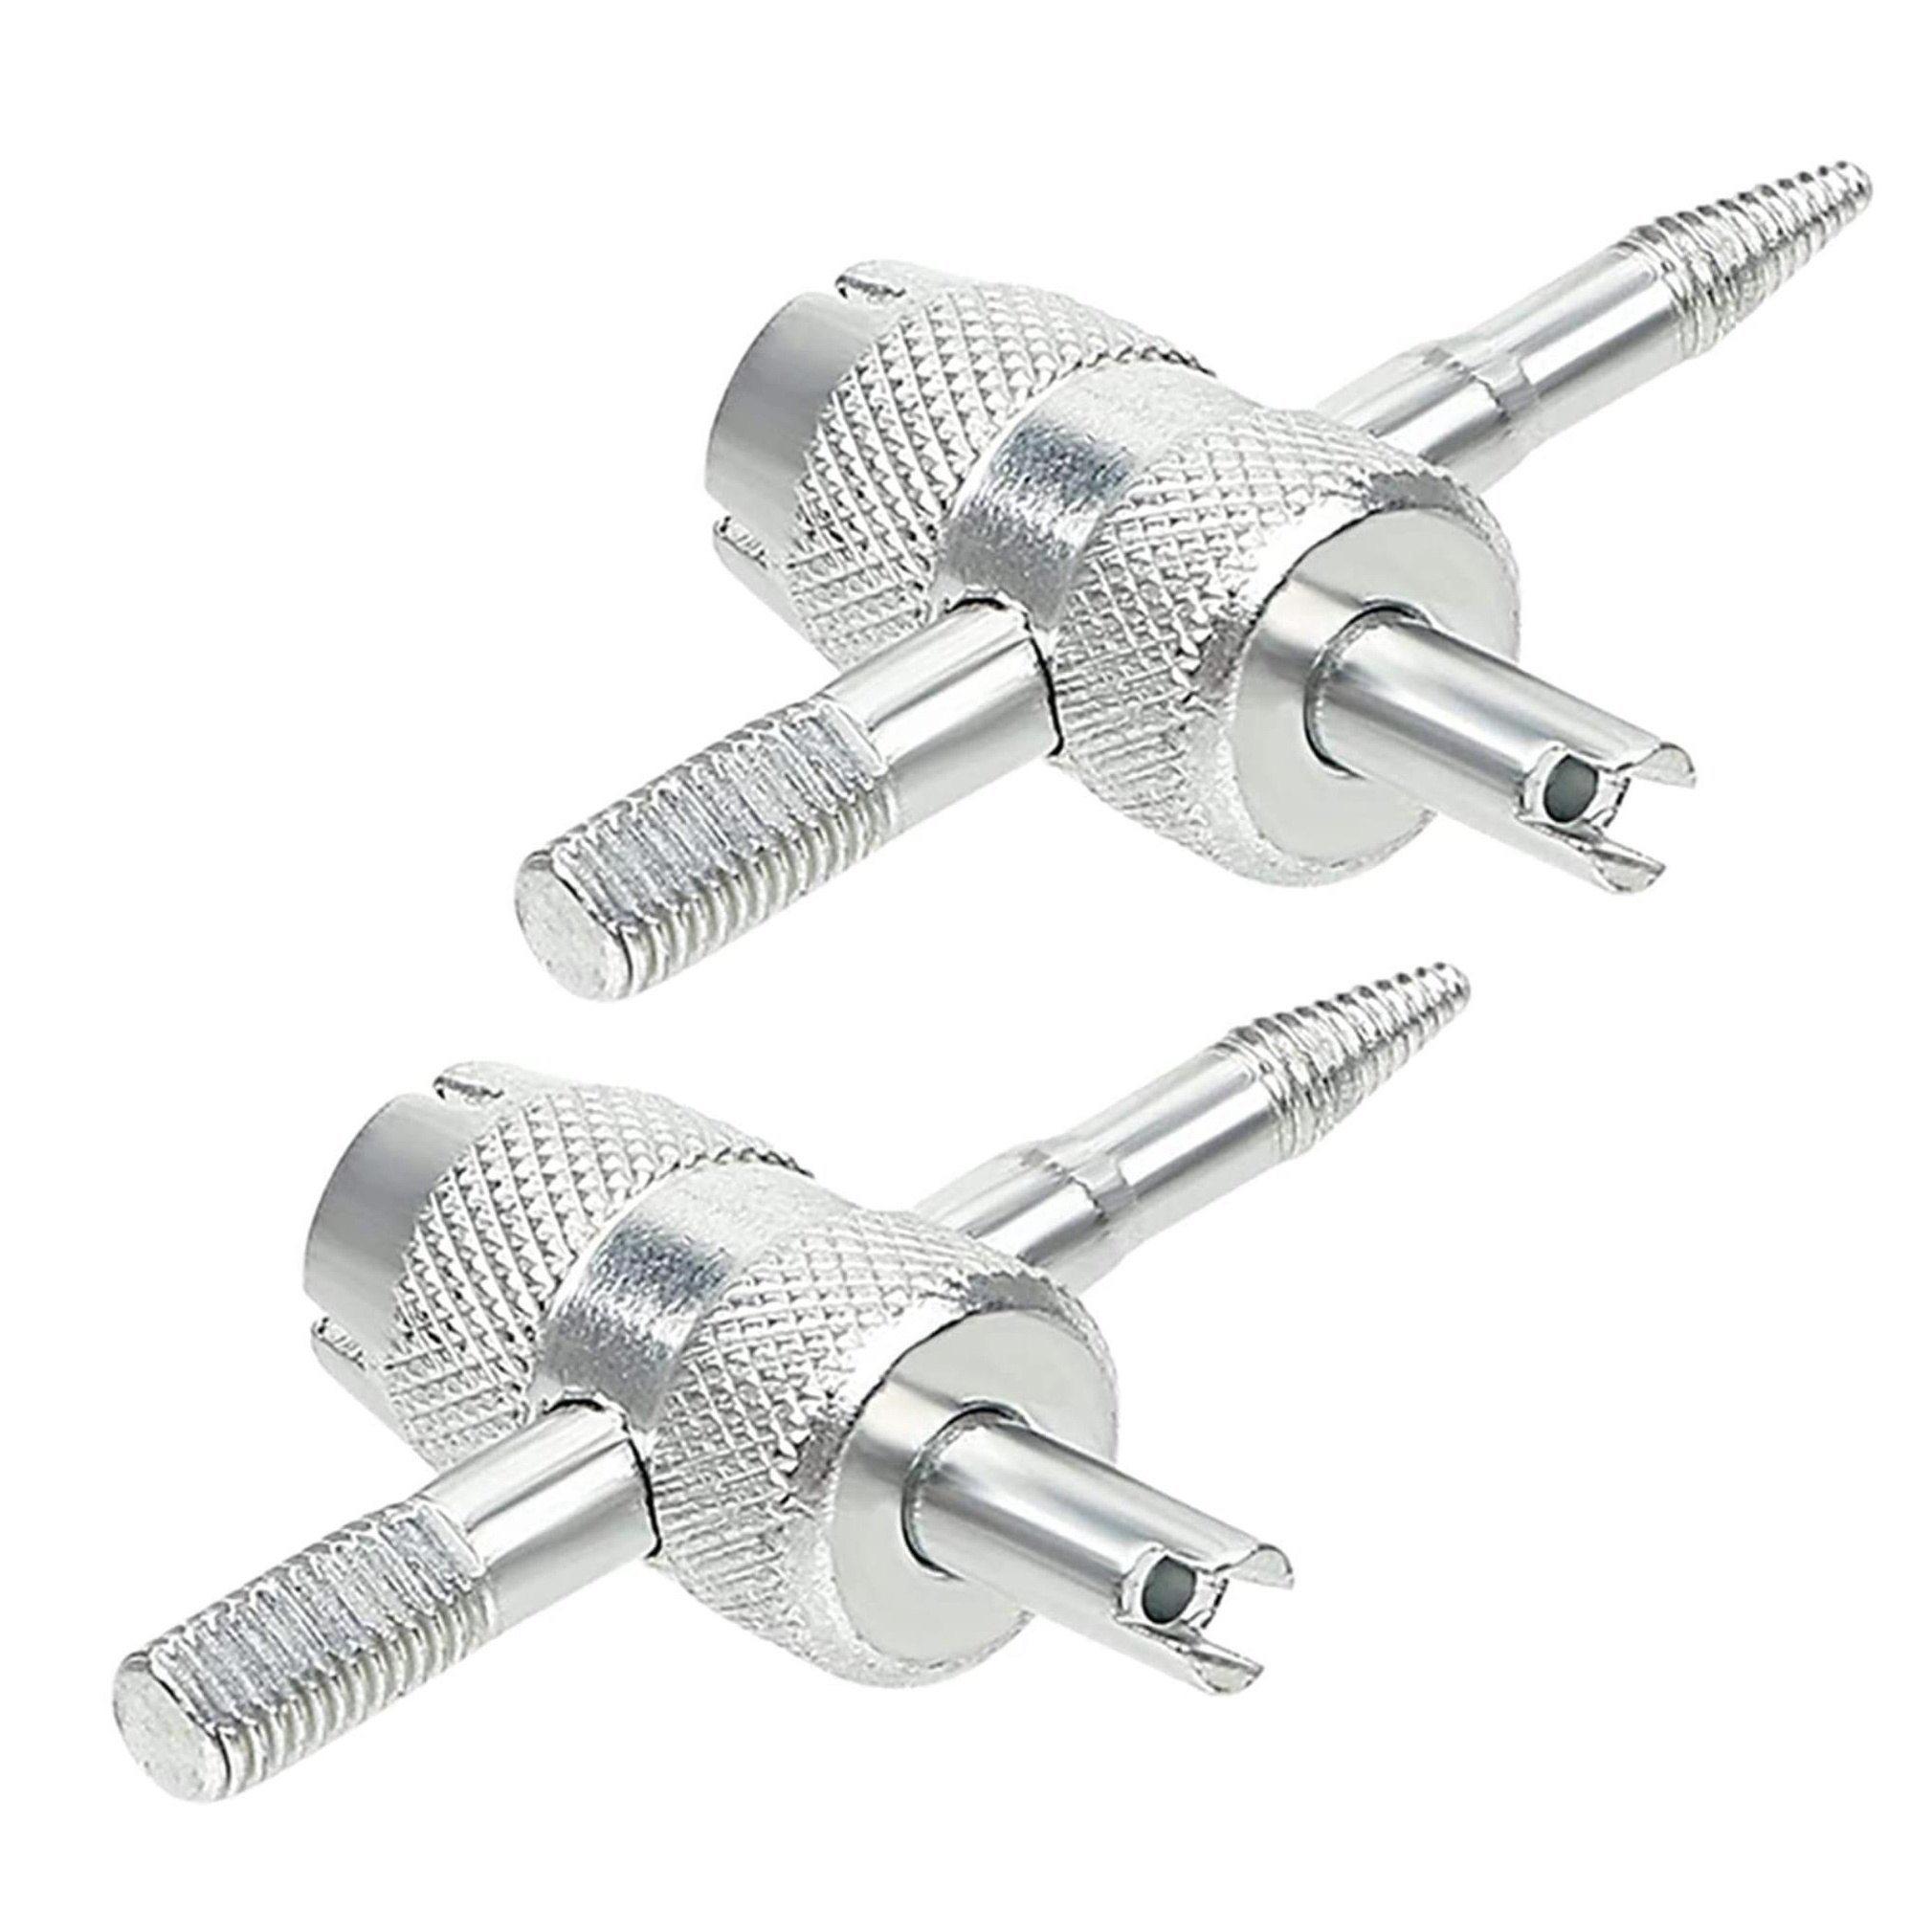  Hvac Service Wrench Tools:3/16 To 3/8 5/16 X 1/4Air  Conditioner Valve Ratchet Wrench